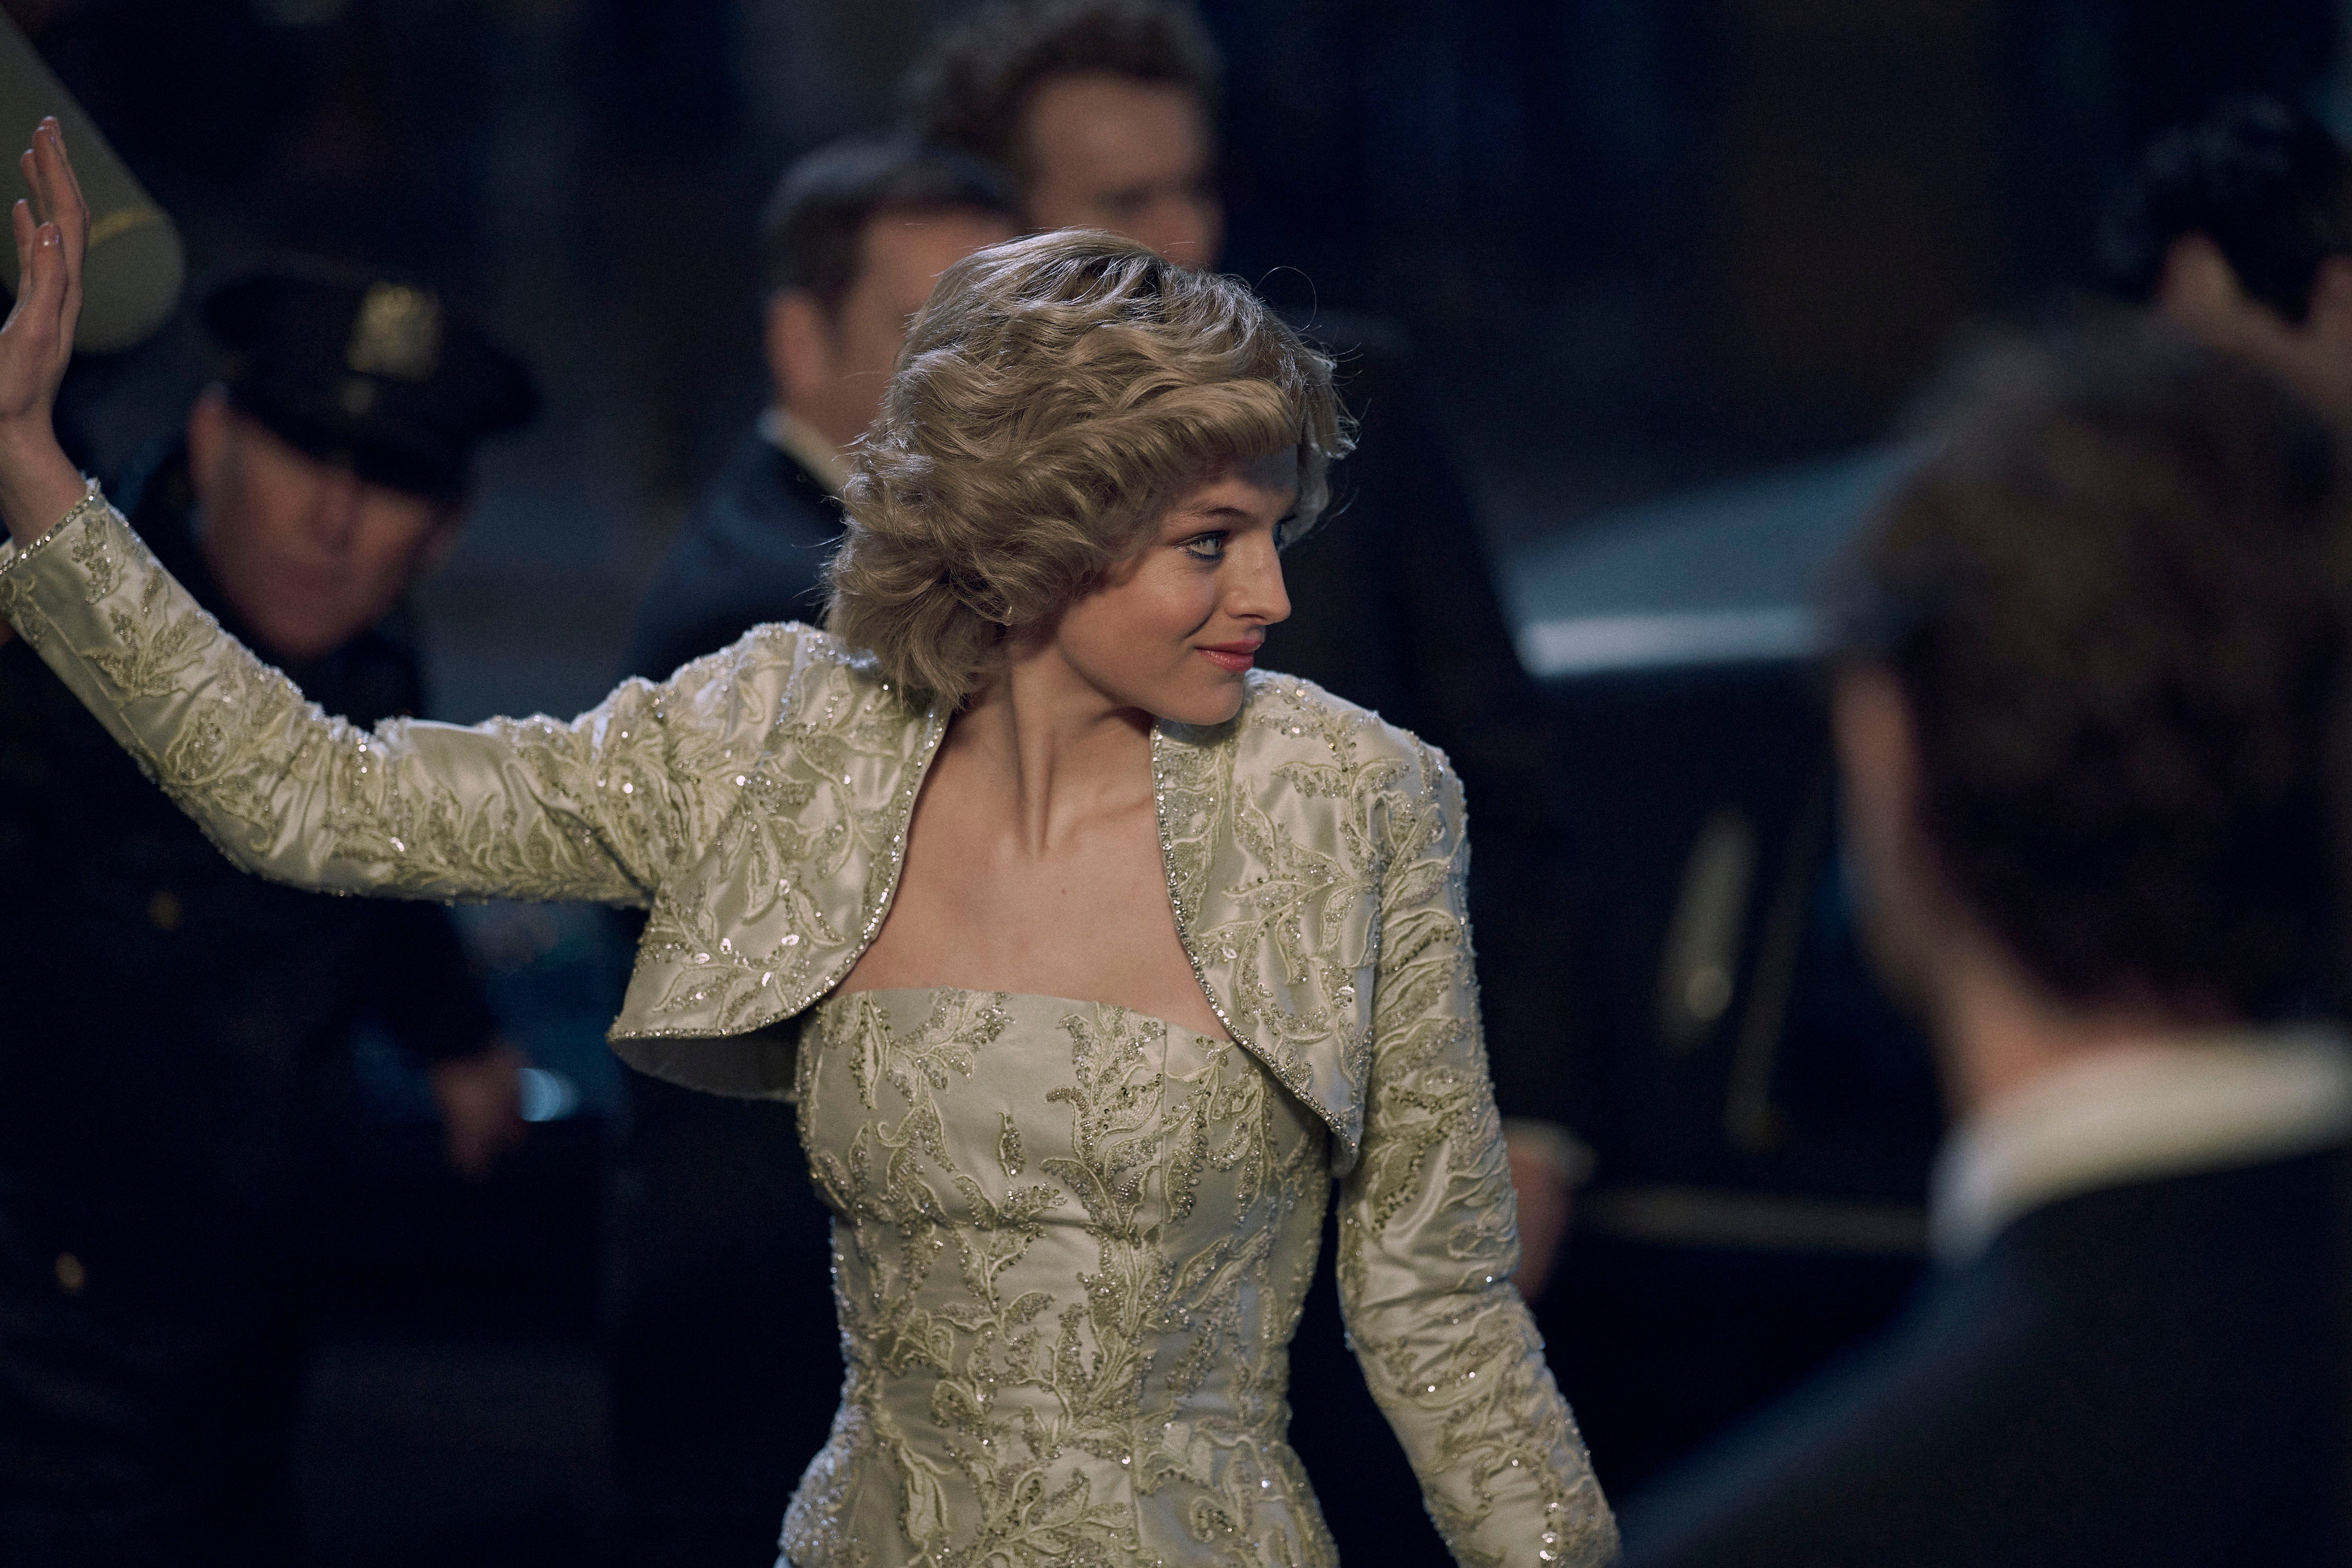 Emma Corrin as Diana in a gold brocade dress, waving with her right arm and looking to her left as she makes her entrance at an event, with security in the background